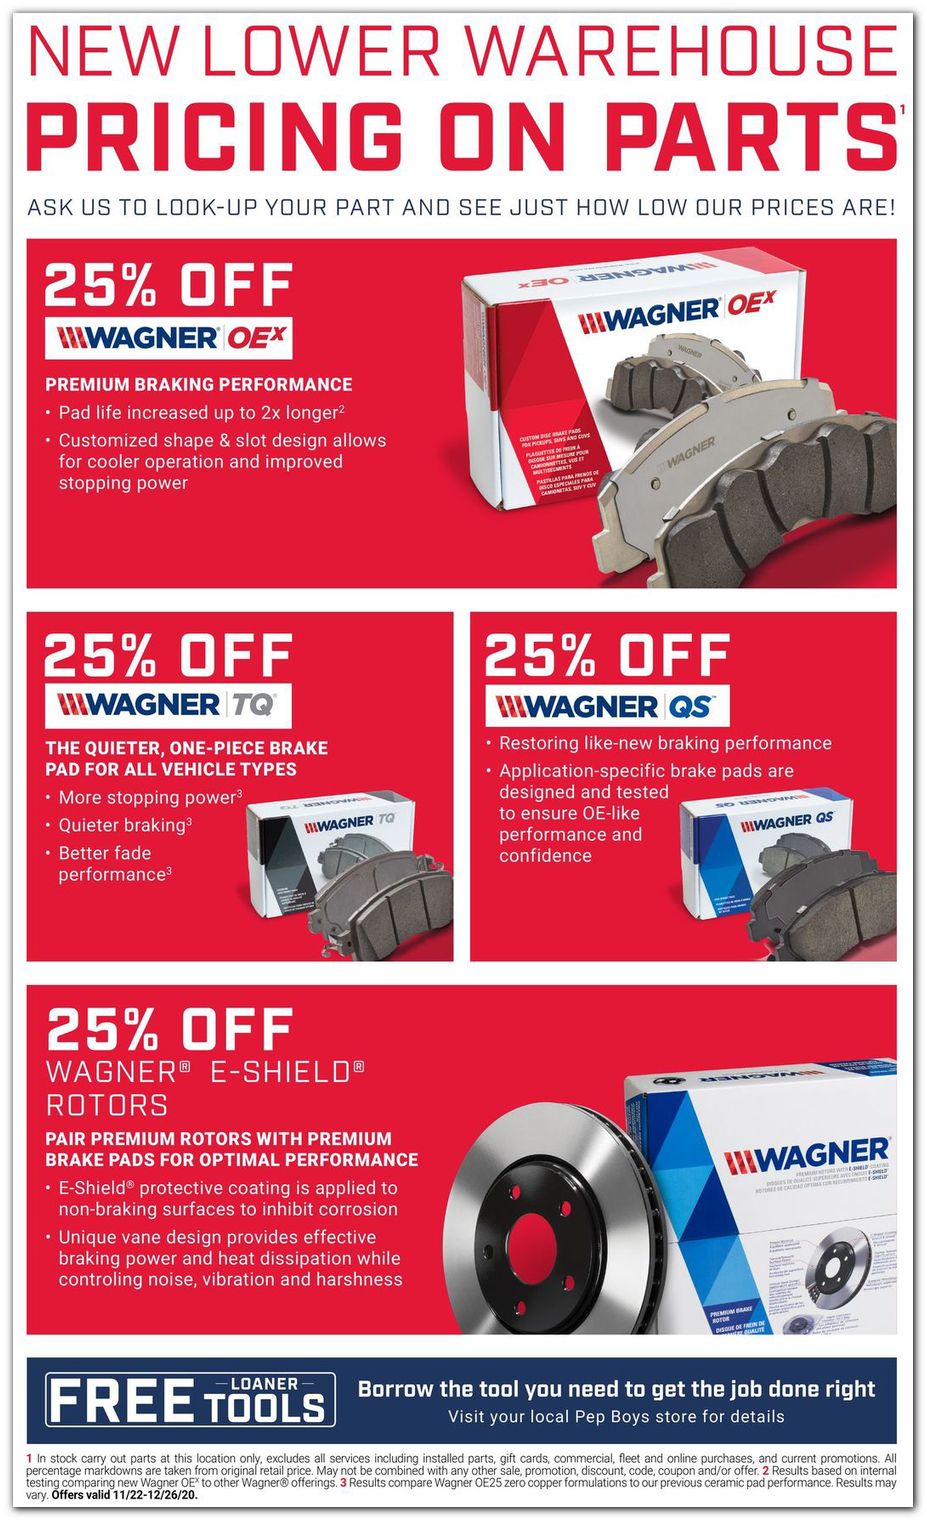 Warehouse Pricing on Parts cont.